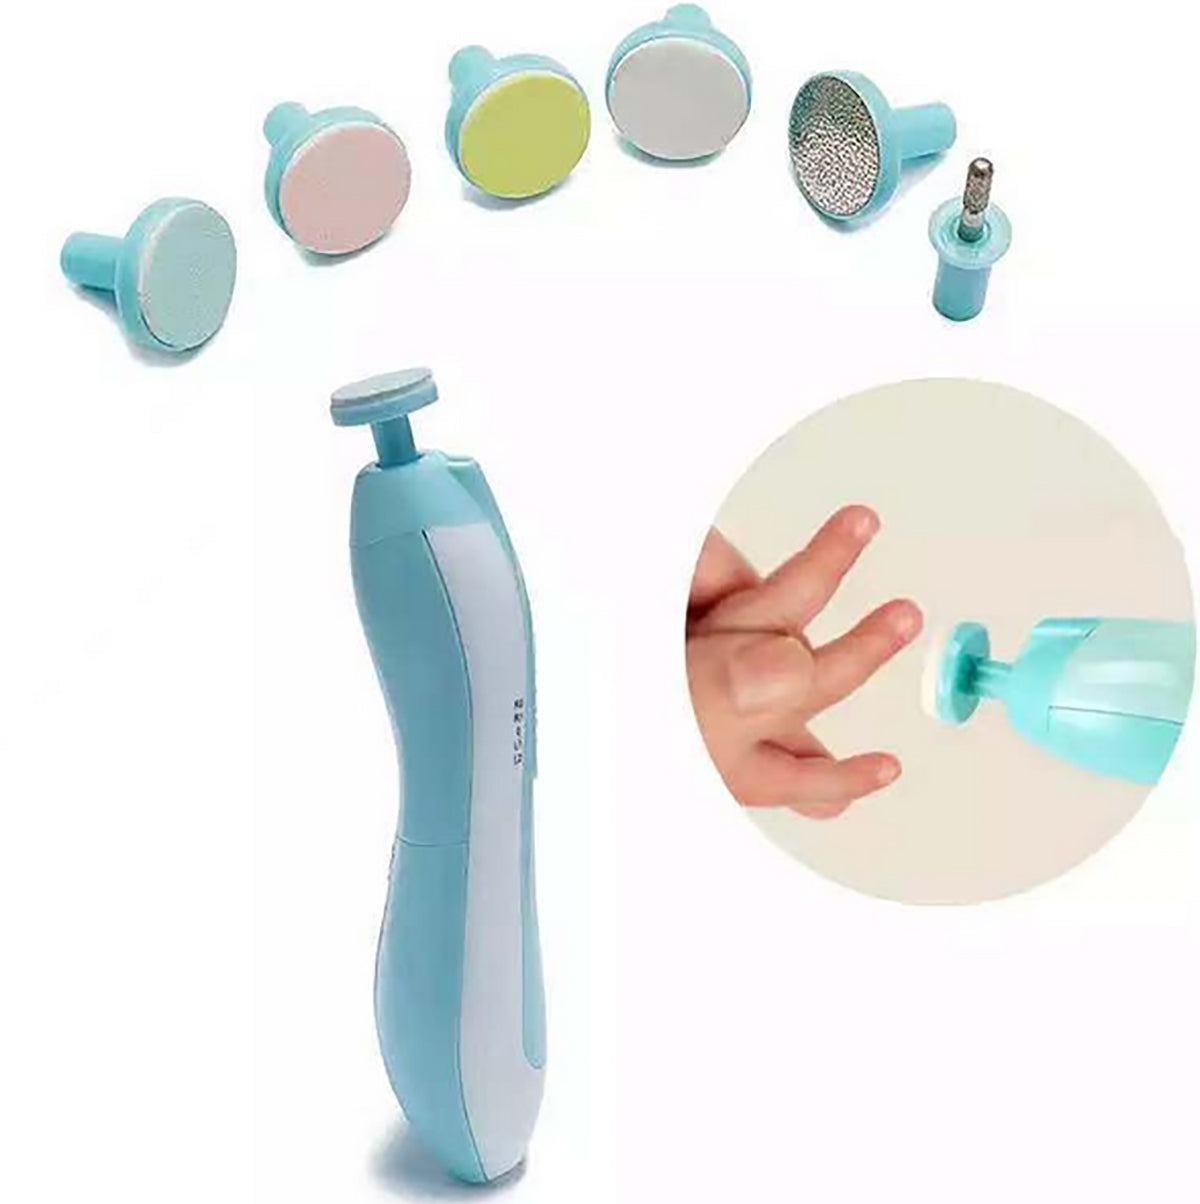 Buy Safety 1st Sleepy Baby Nail Clipper Online at Low Prices in India -  Amazon.in